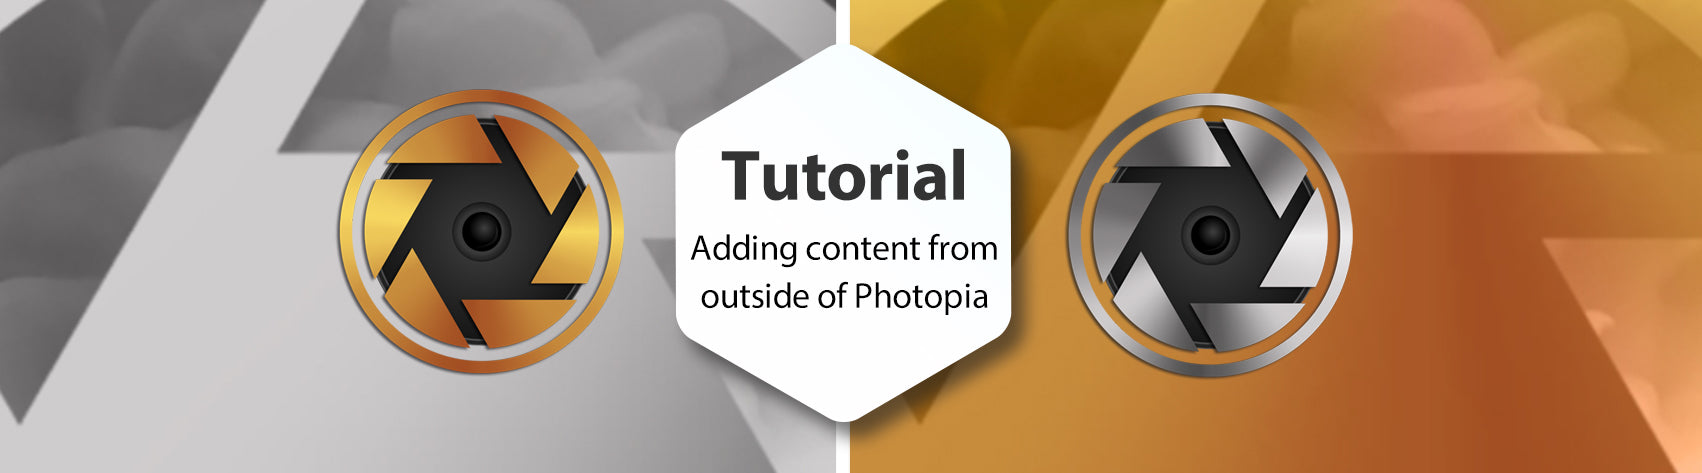 Lesson - Adding content from outside of Photopia